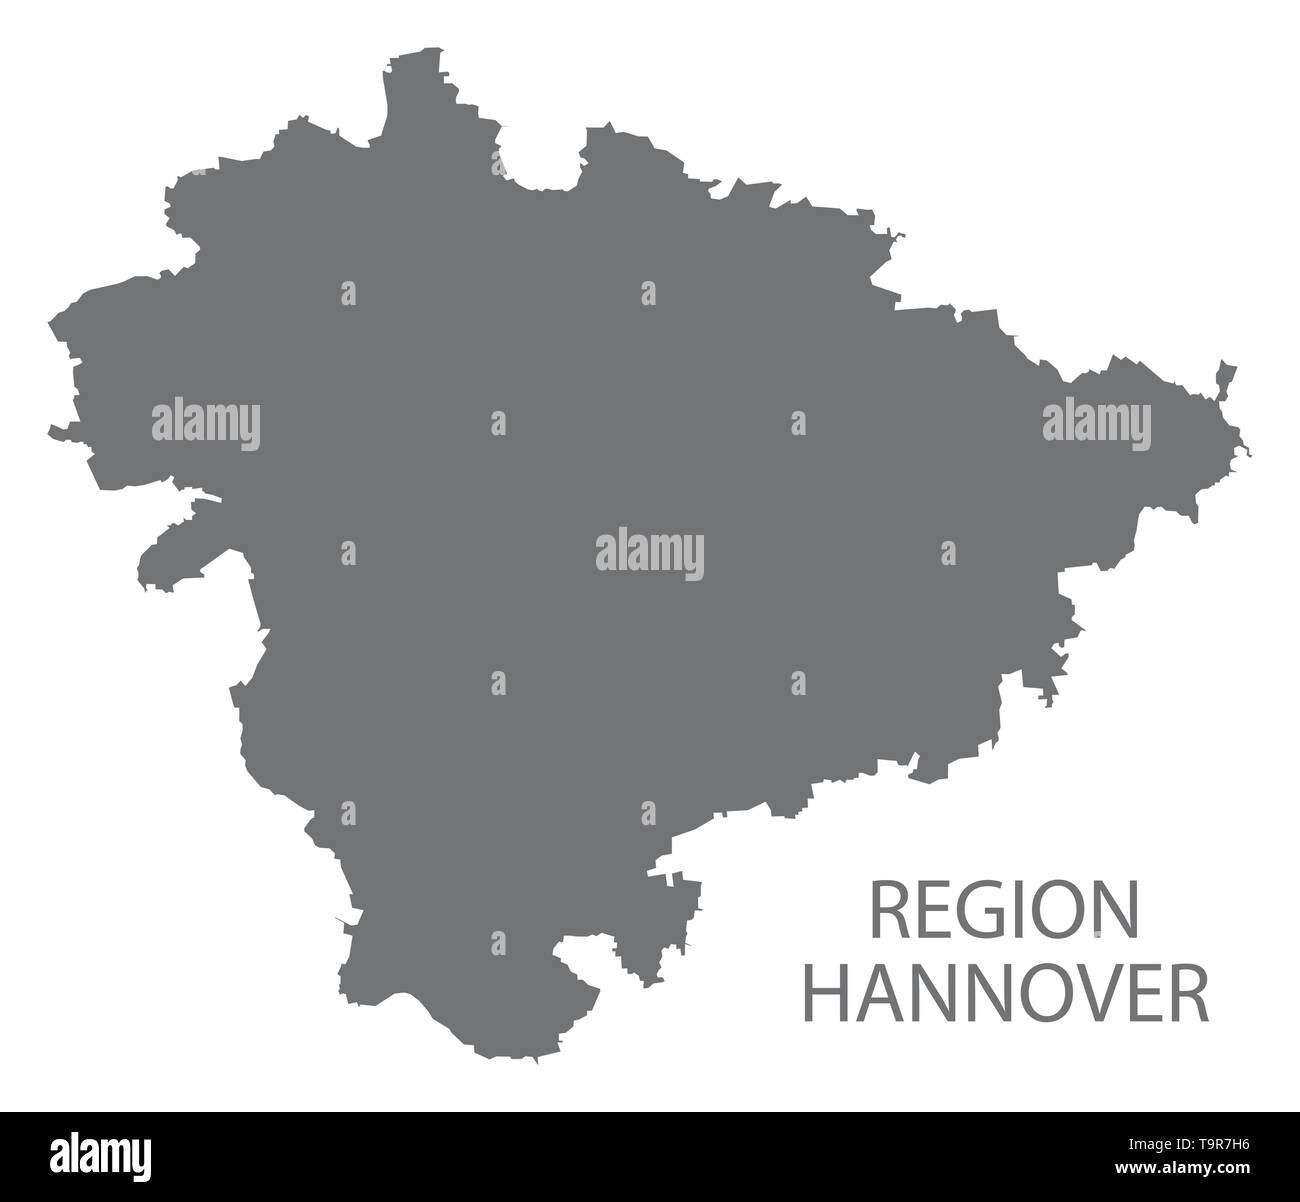 Region Hannover grey county map of Lower Saxony Germany DE Stock Vector